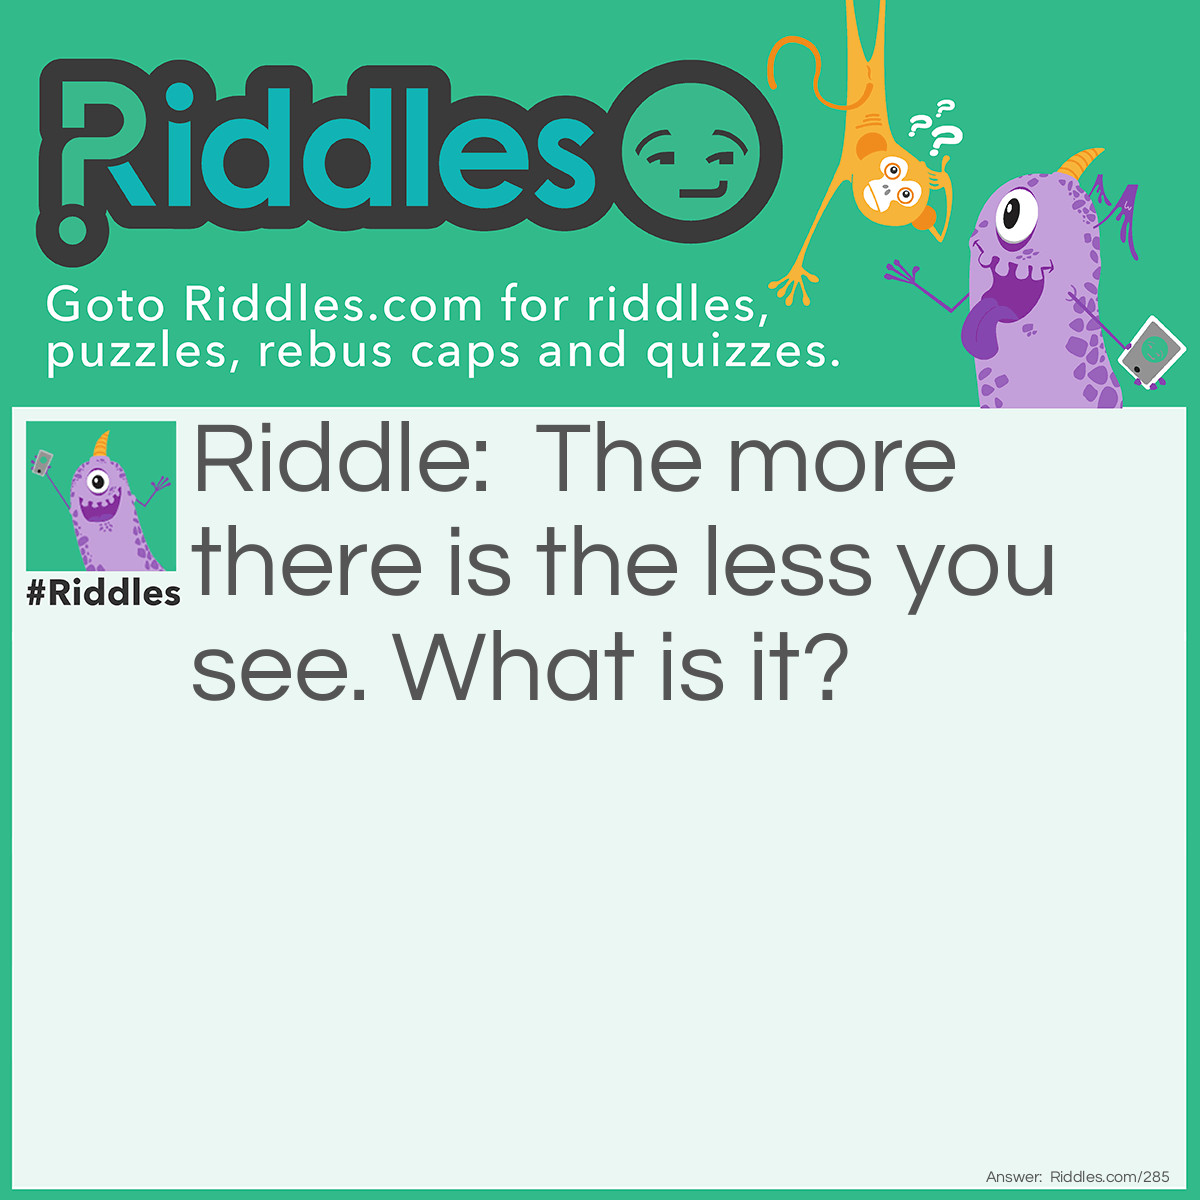 Riddle: The more there is the less you see. What is it? Answer: Fog.